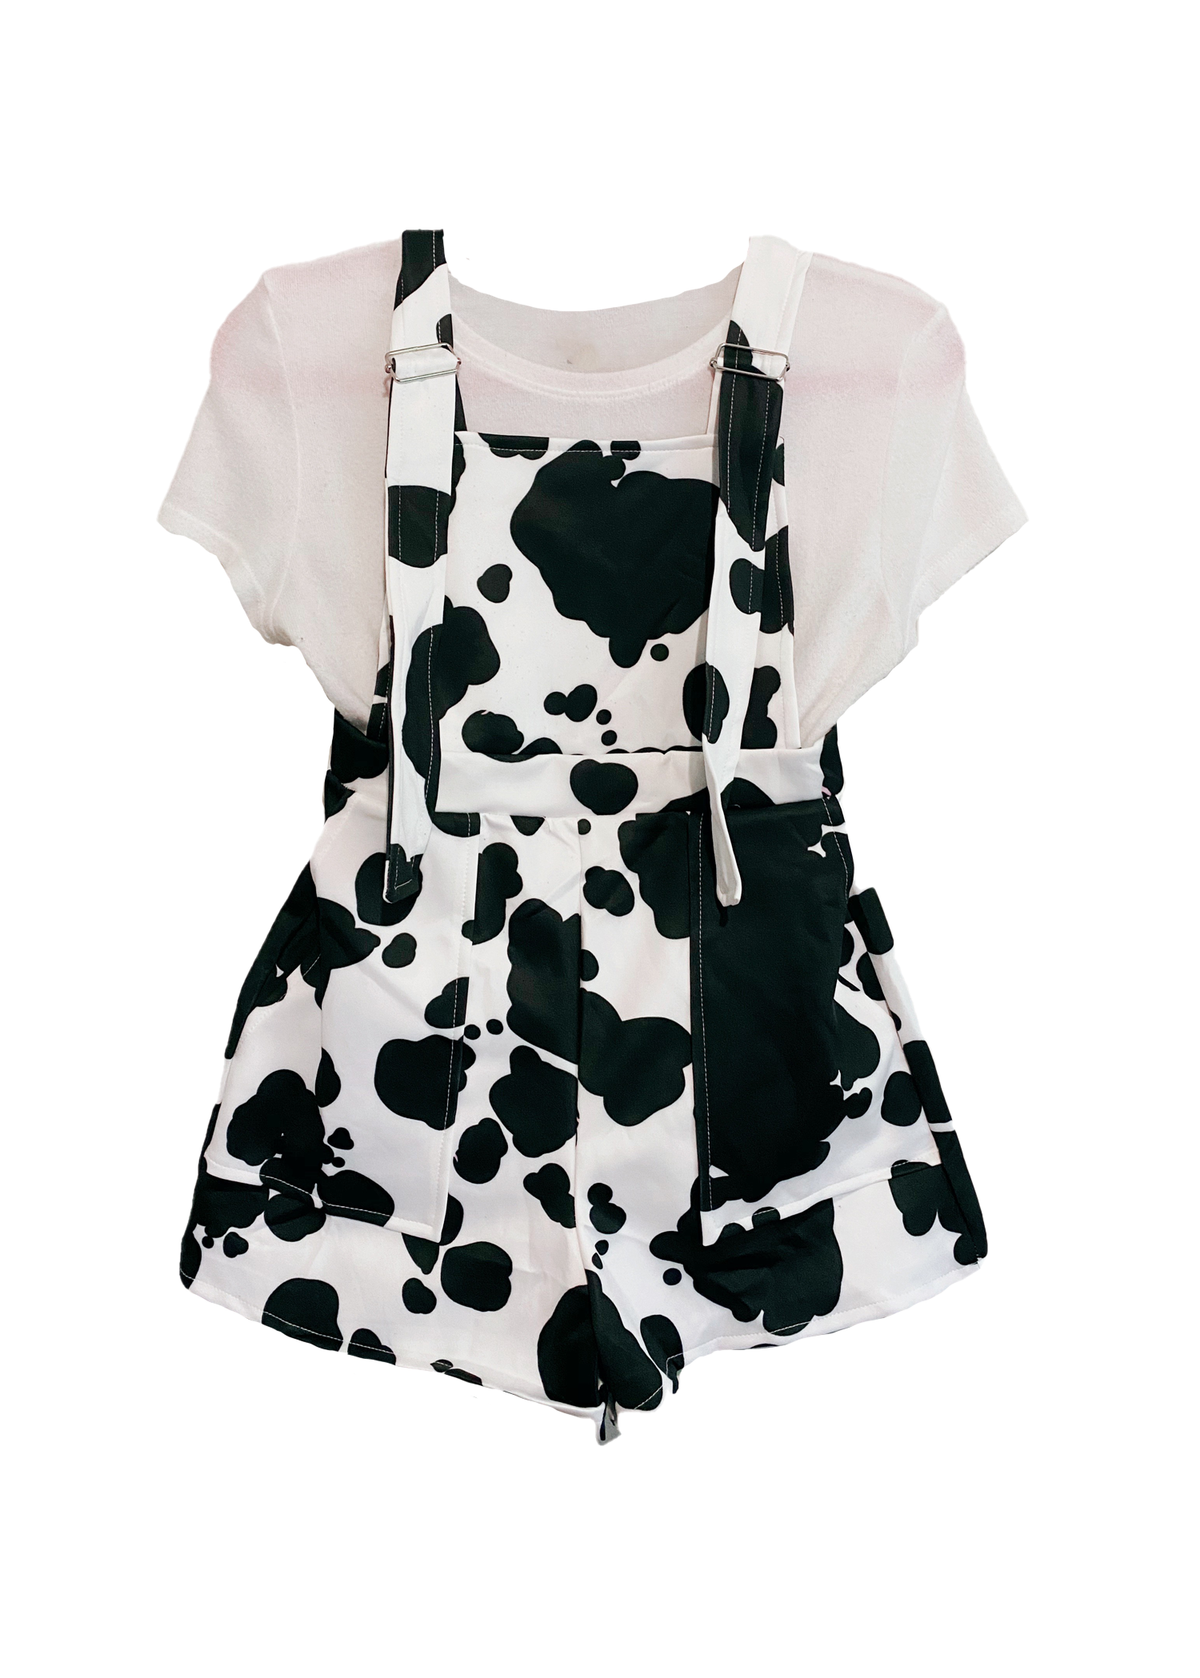 M Cow Print Overall Shorts